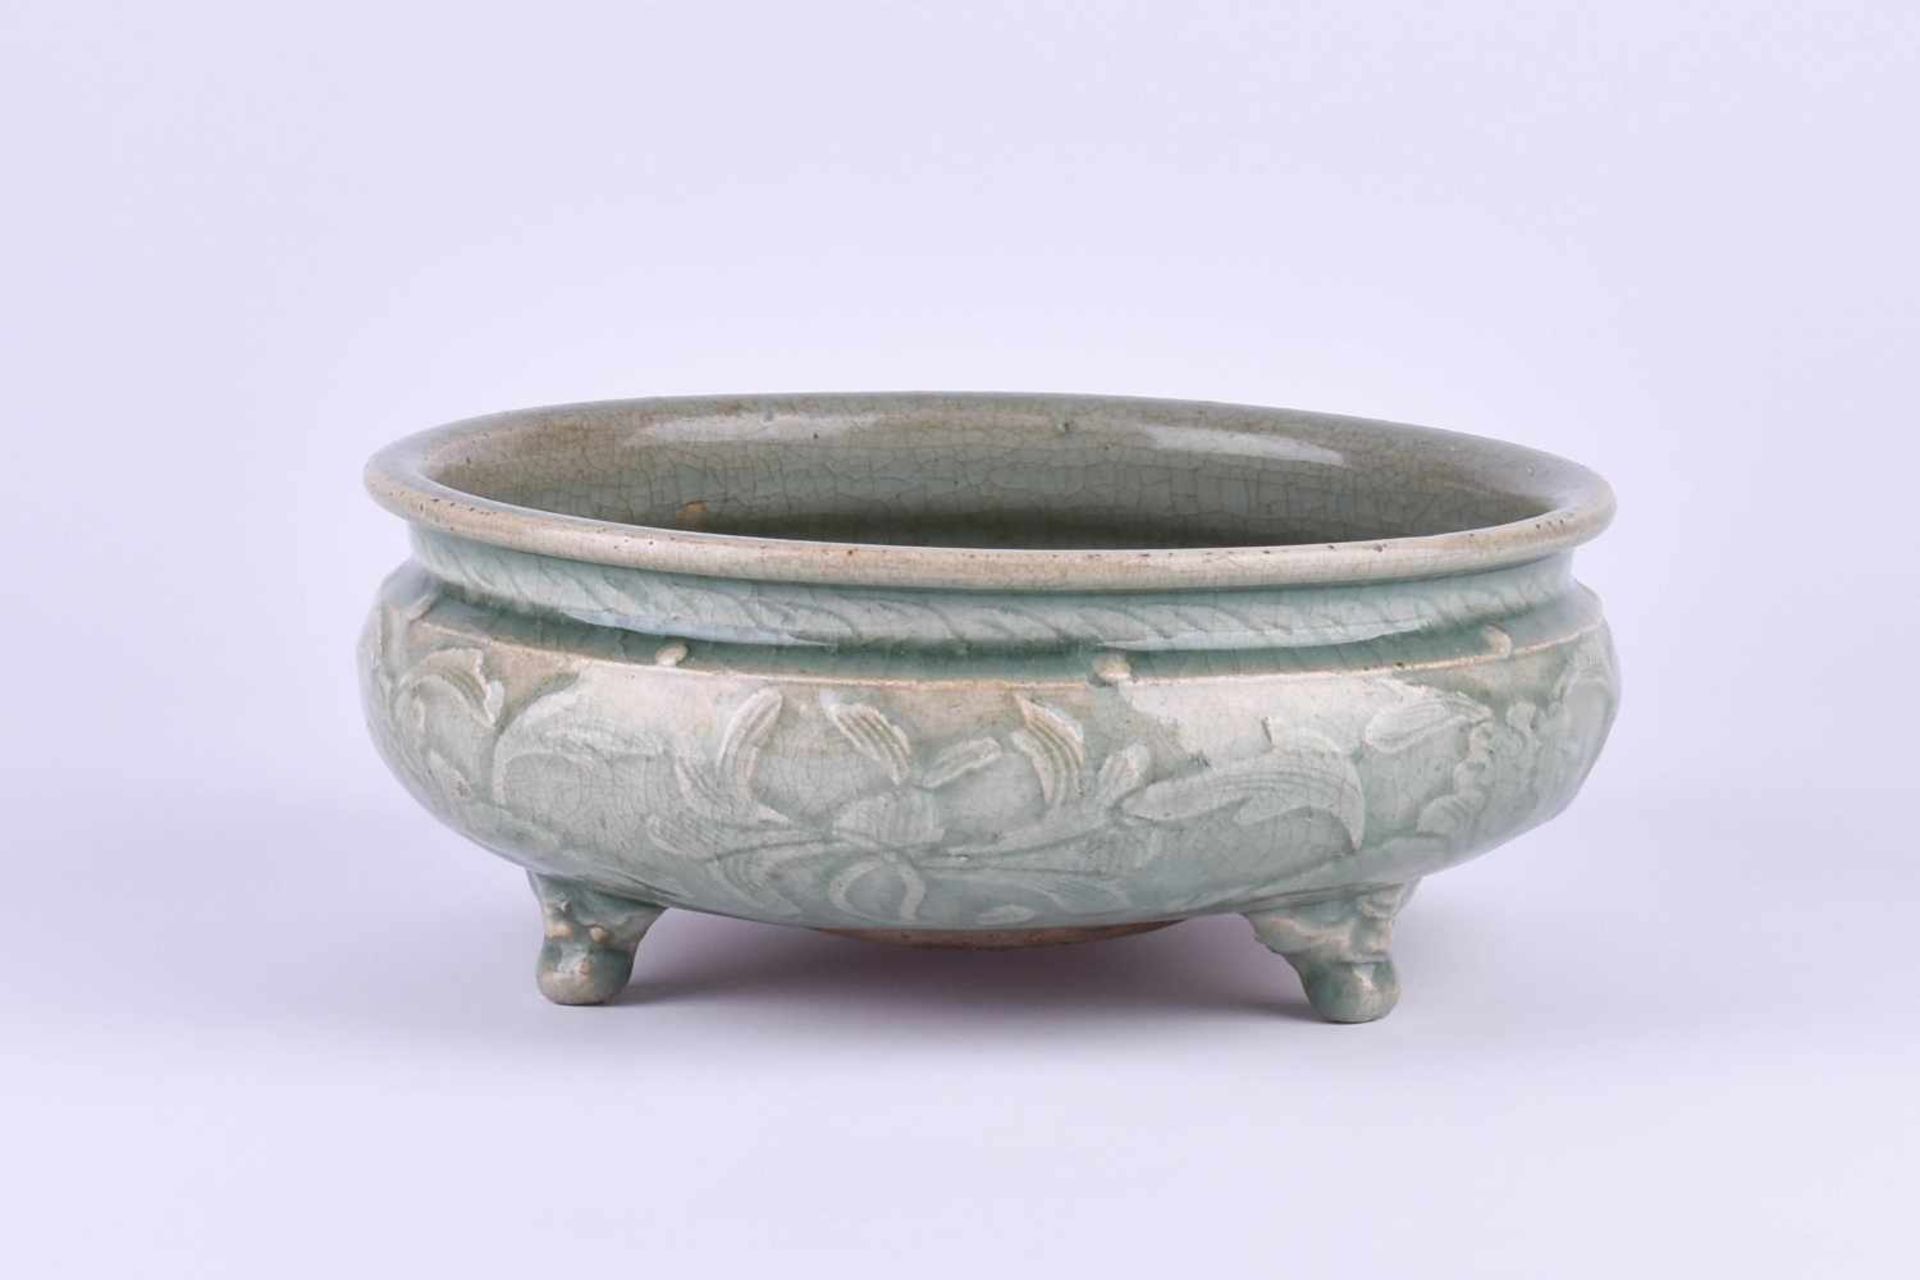 Celadon bowl China Ming periodceladon glaze, all around decorated with reliefed floral decoration, - Image 2 of 5